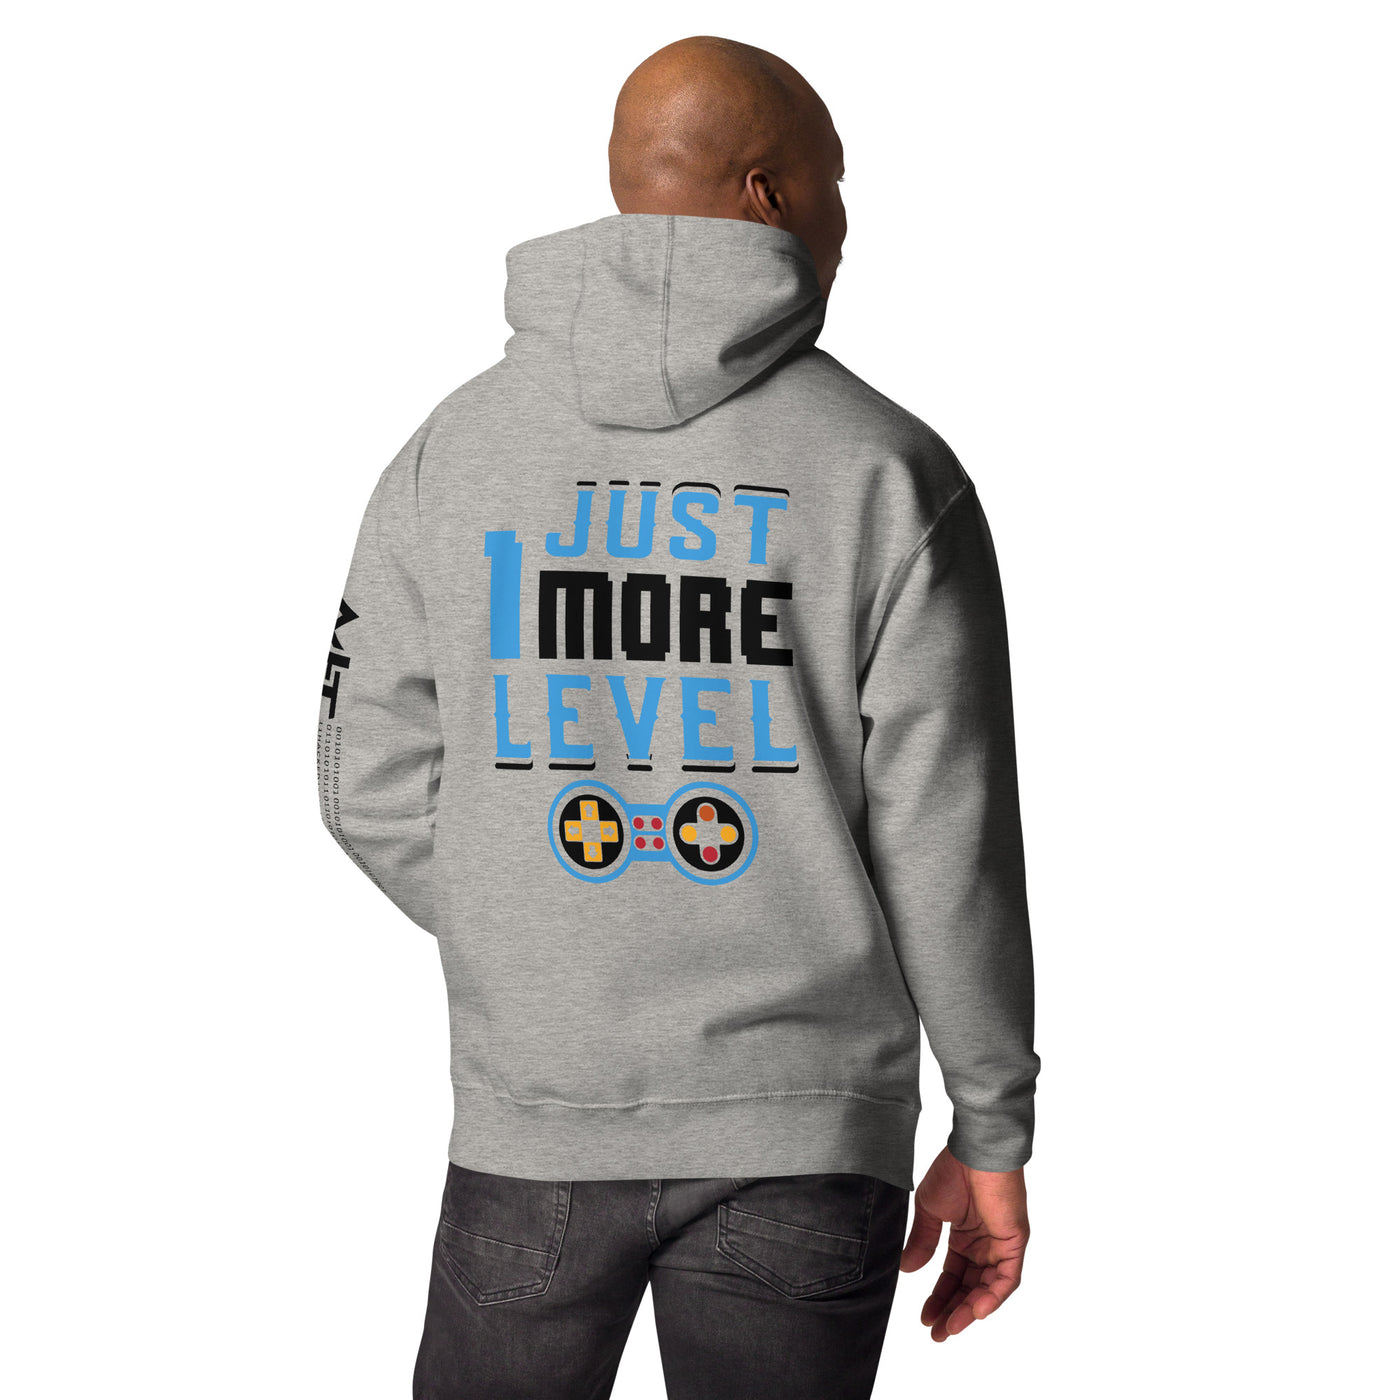 Just 1 More Level in Dark Text - Unisex Hoodie ( Back Print )